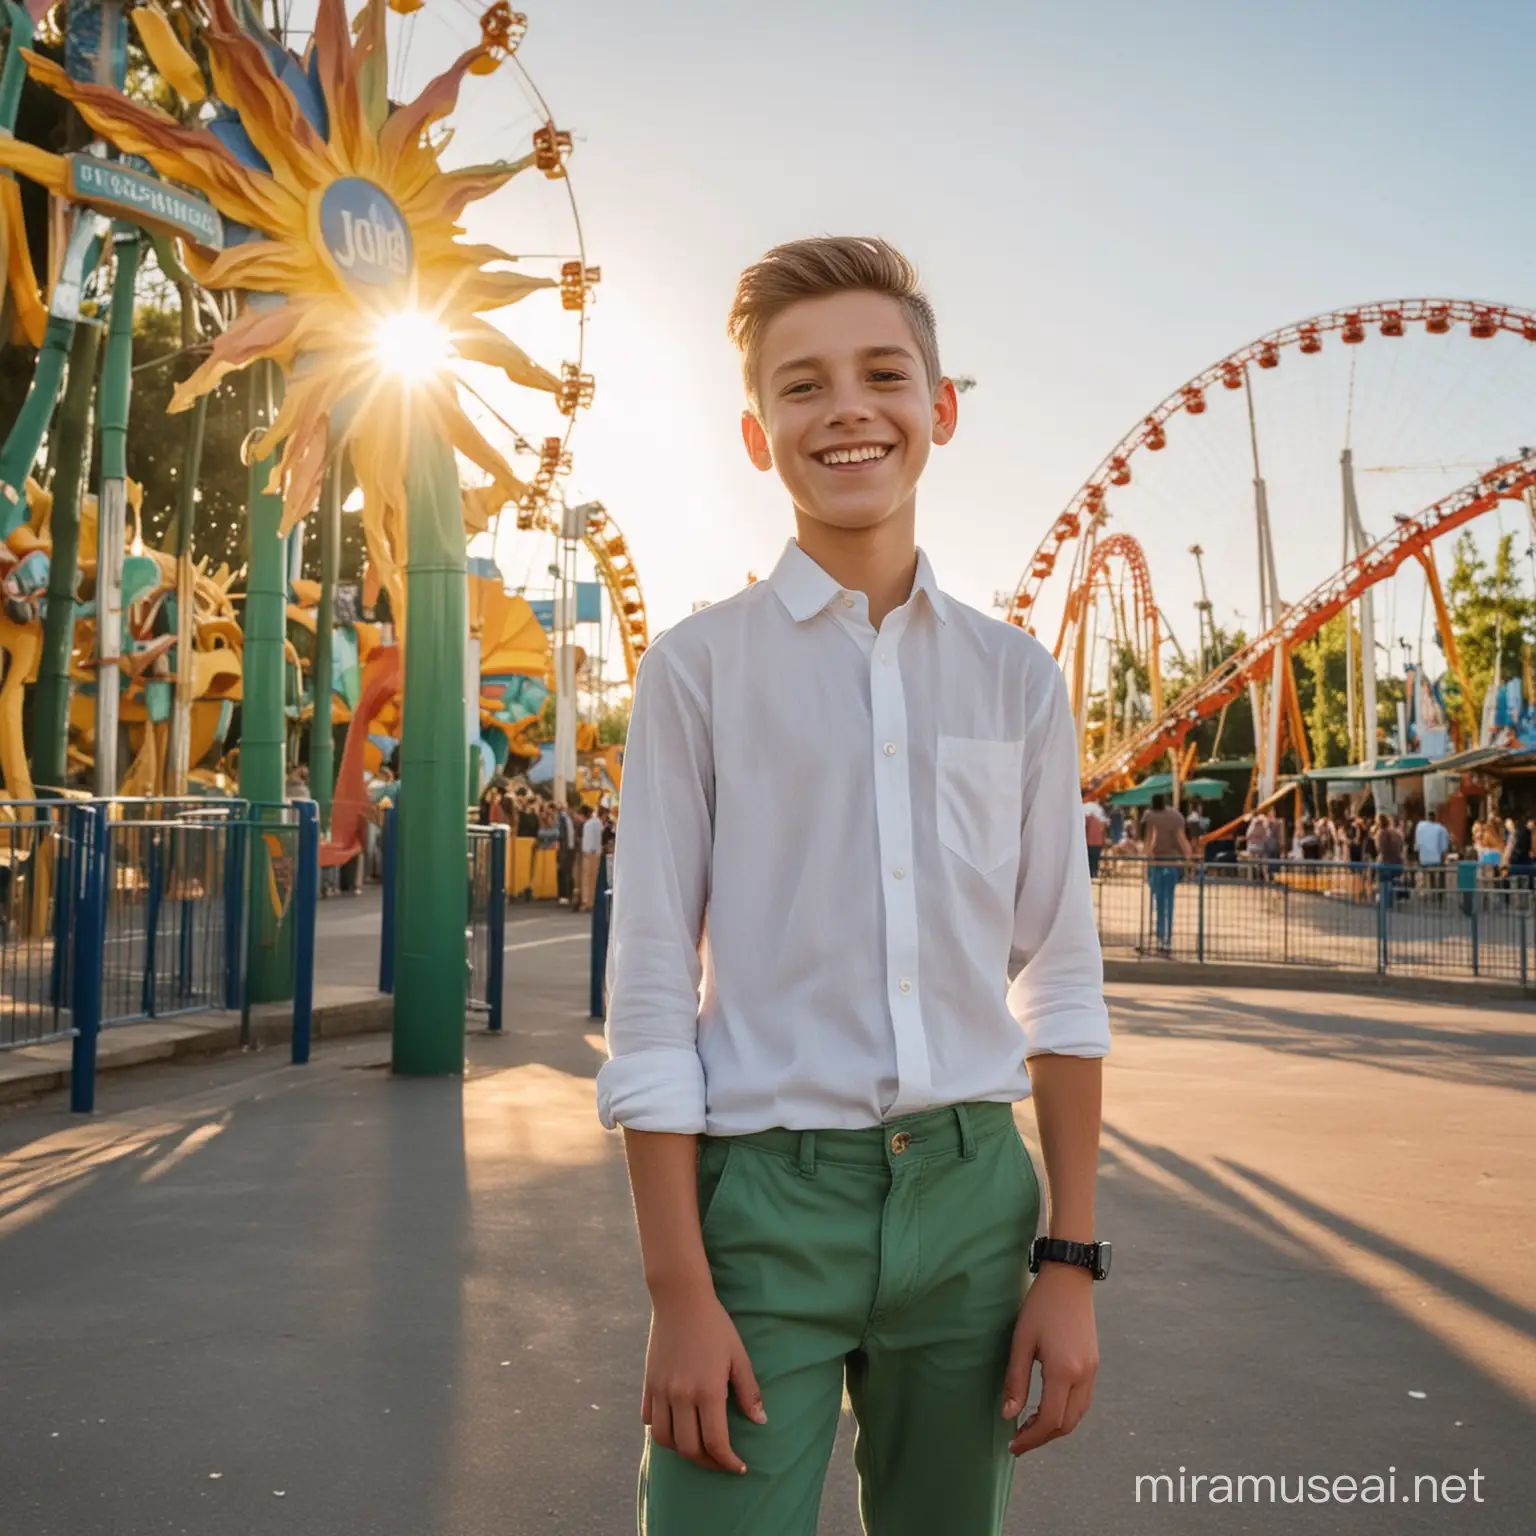 Generate the image of a boy who is 14 years old boy. His skin is white in colour. He should be in a theme park . He should wear a shirt in green colour and trousers in bule colour wearing shoes. He is looking at the camera smiling.The sun is shining on his face. He should be standing in a theme park.